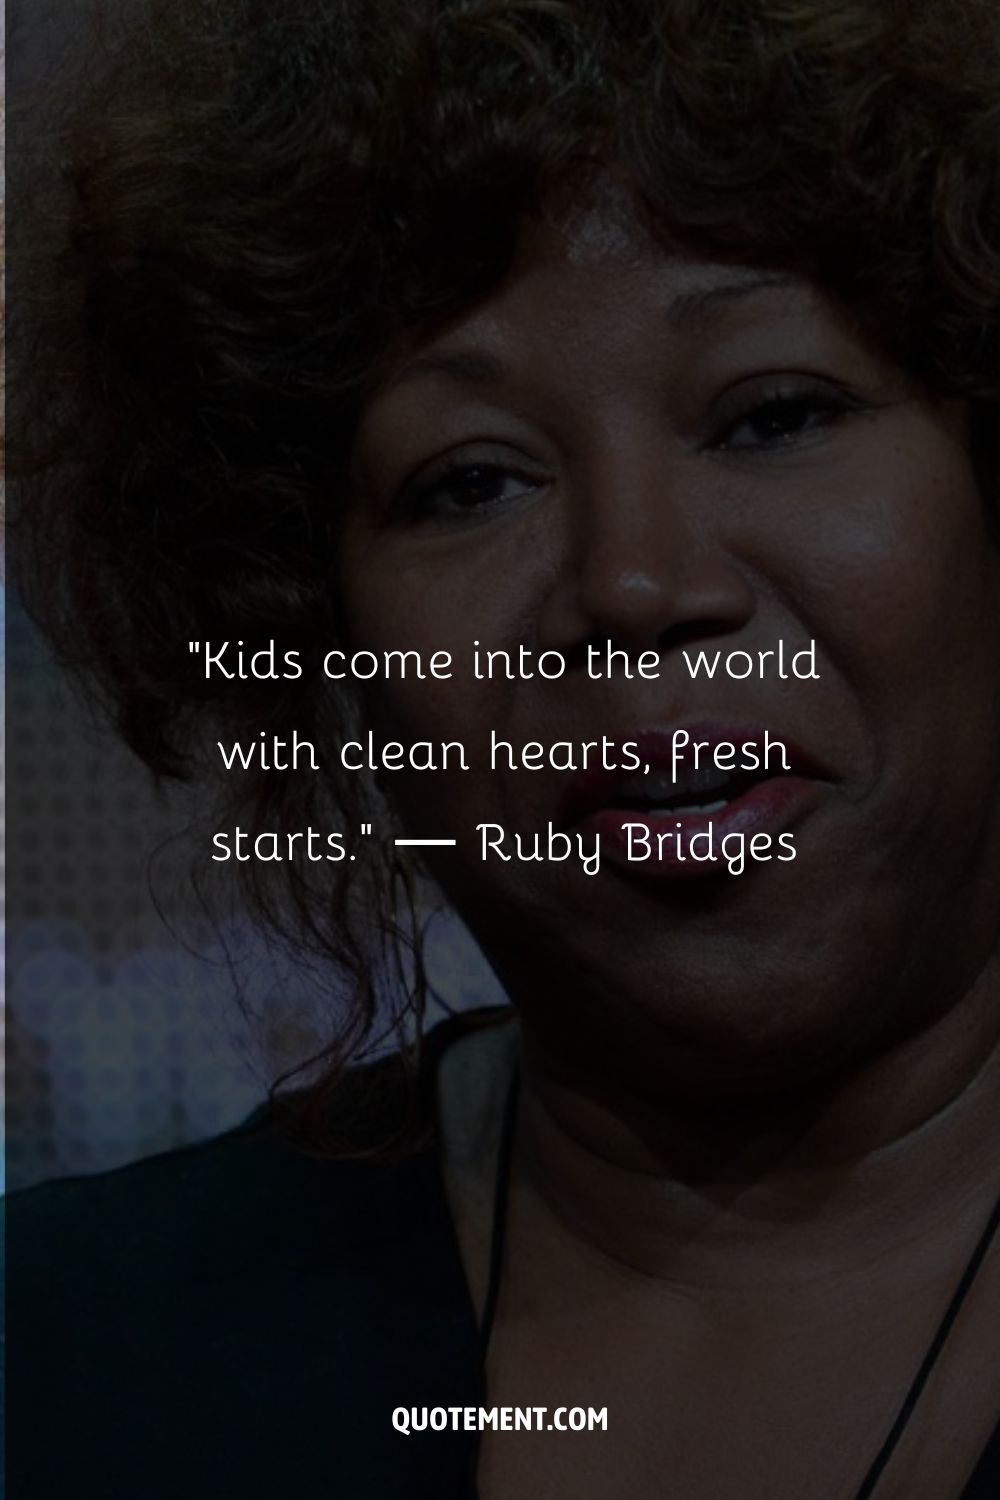 Kids come into the world with clean hearts, fresh starts